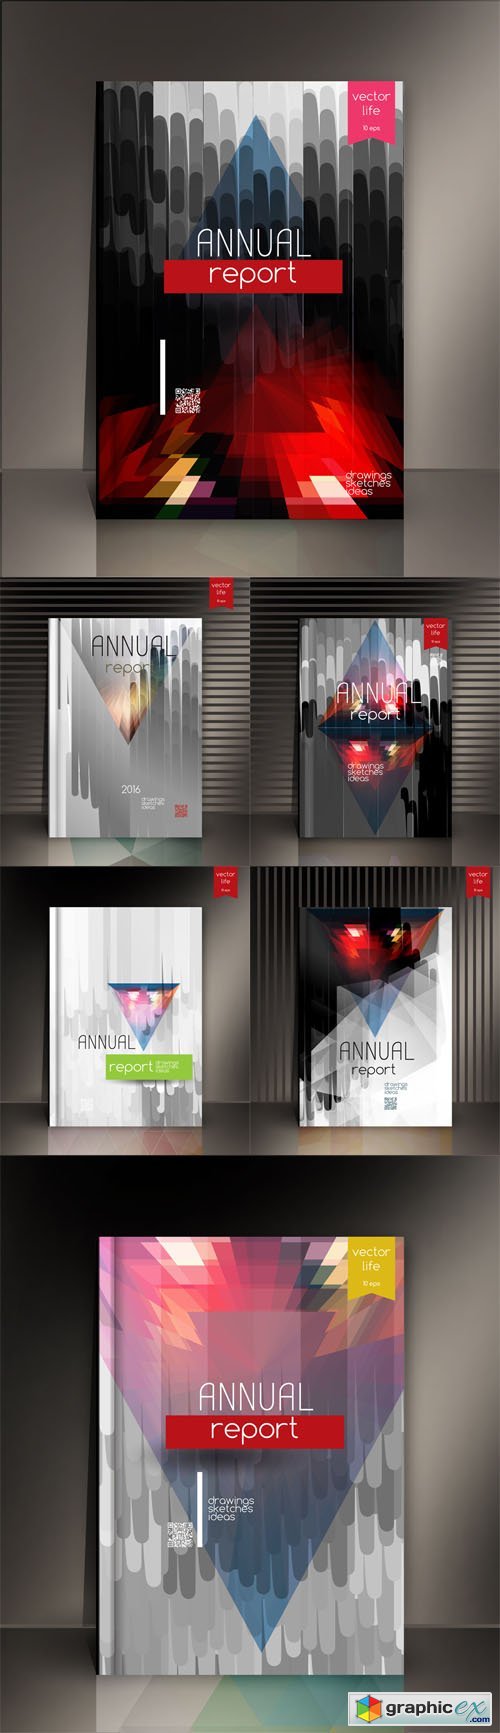 Modern Concept of Cover Design in the Polygonal Style